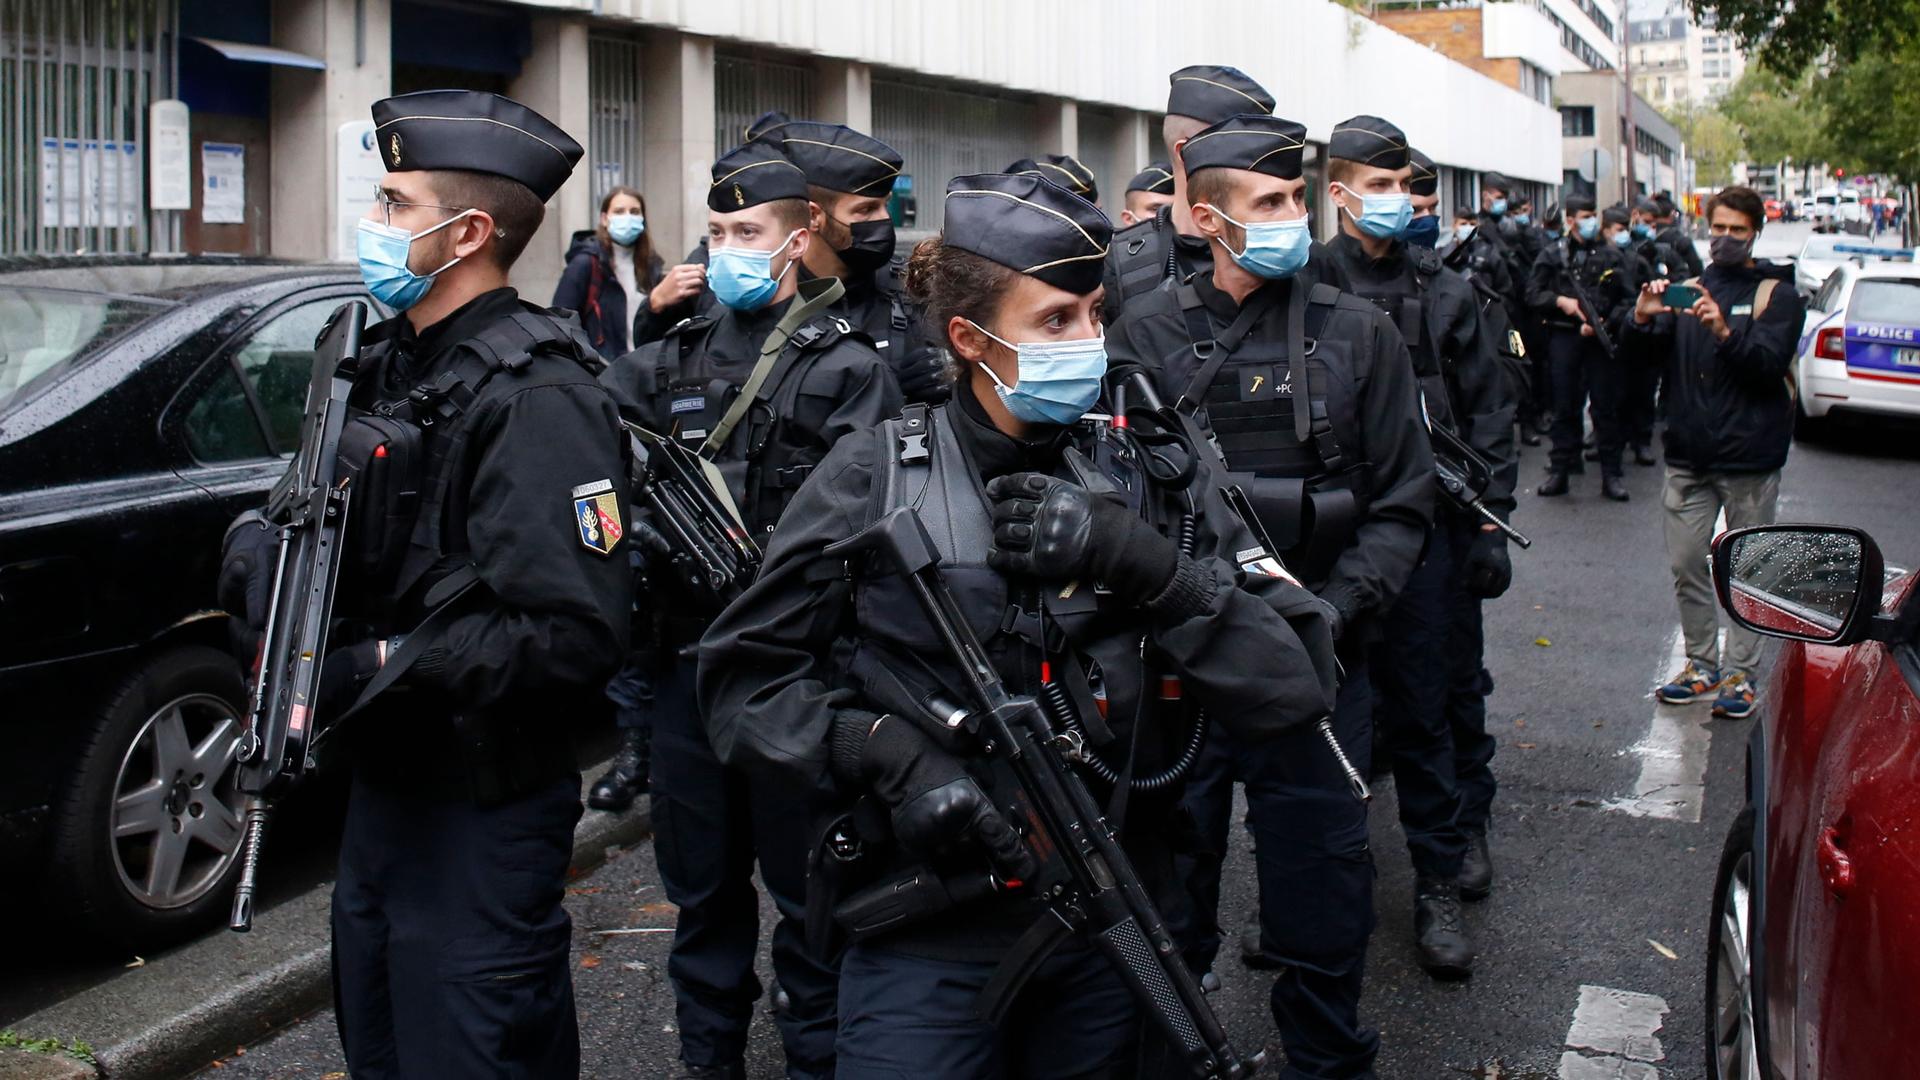 A group of police officers are shown carrying large weapons and wearing face masks while walking down the middle of a street.